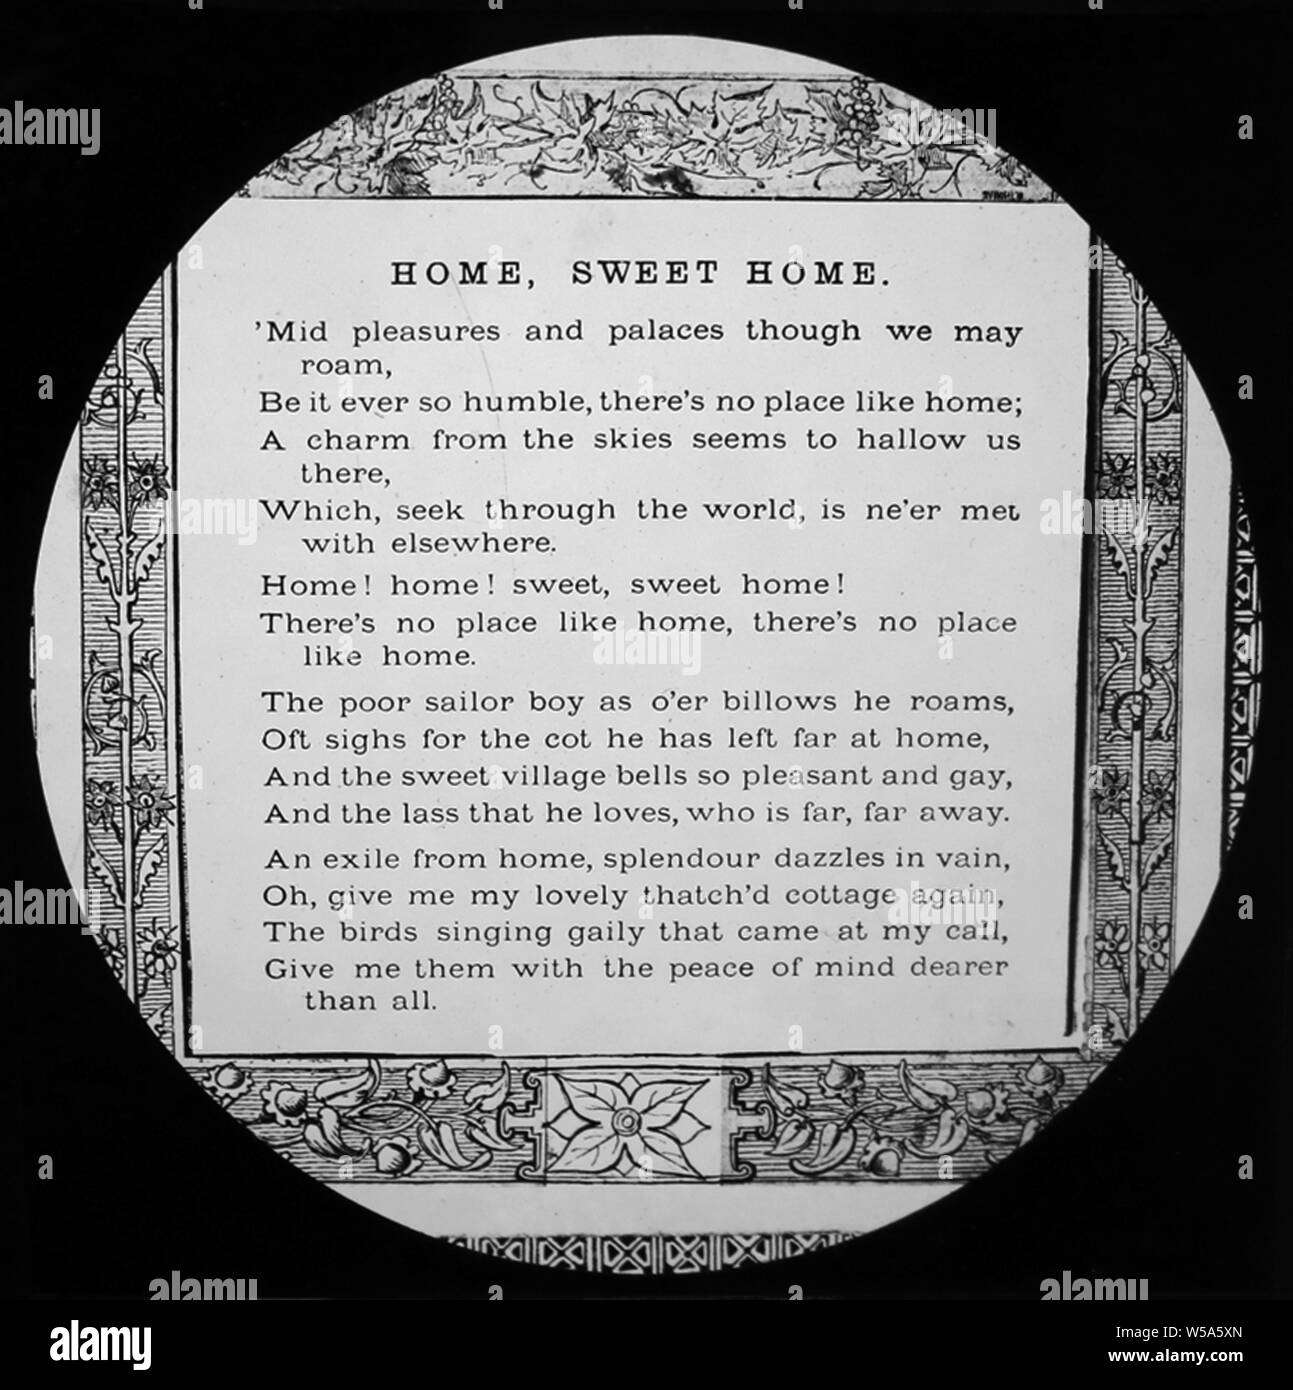 Home Sweet Home song lyrics Banque D'Images